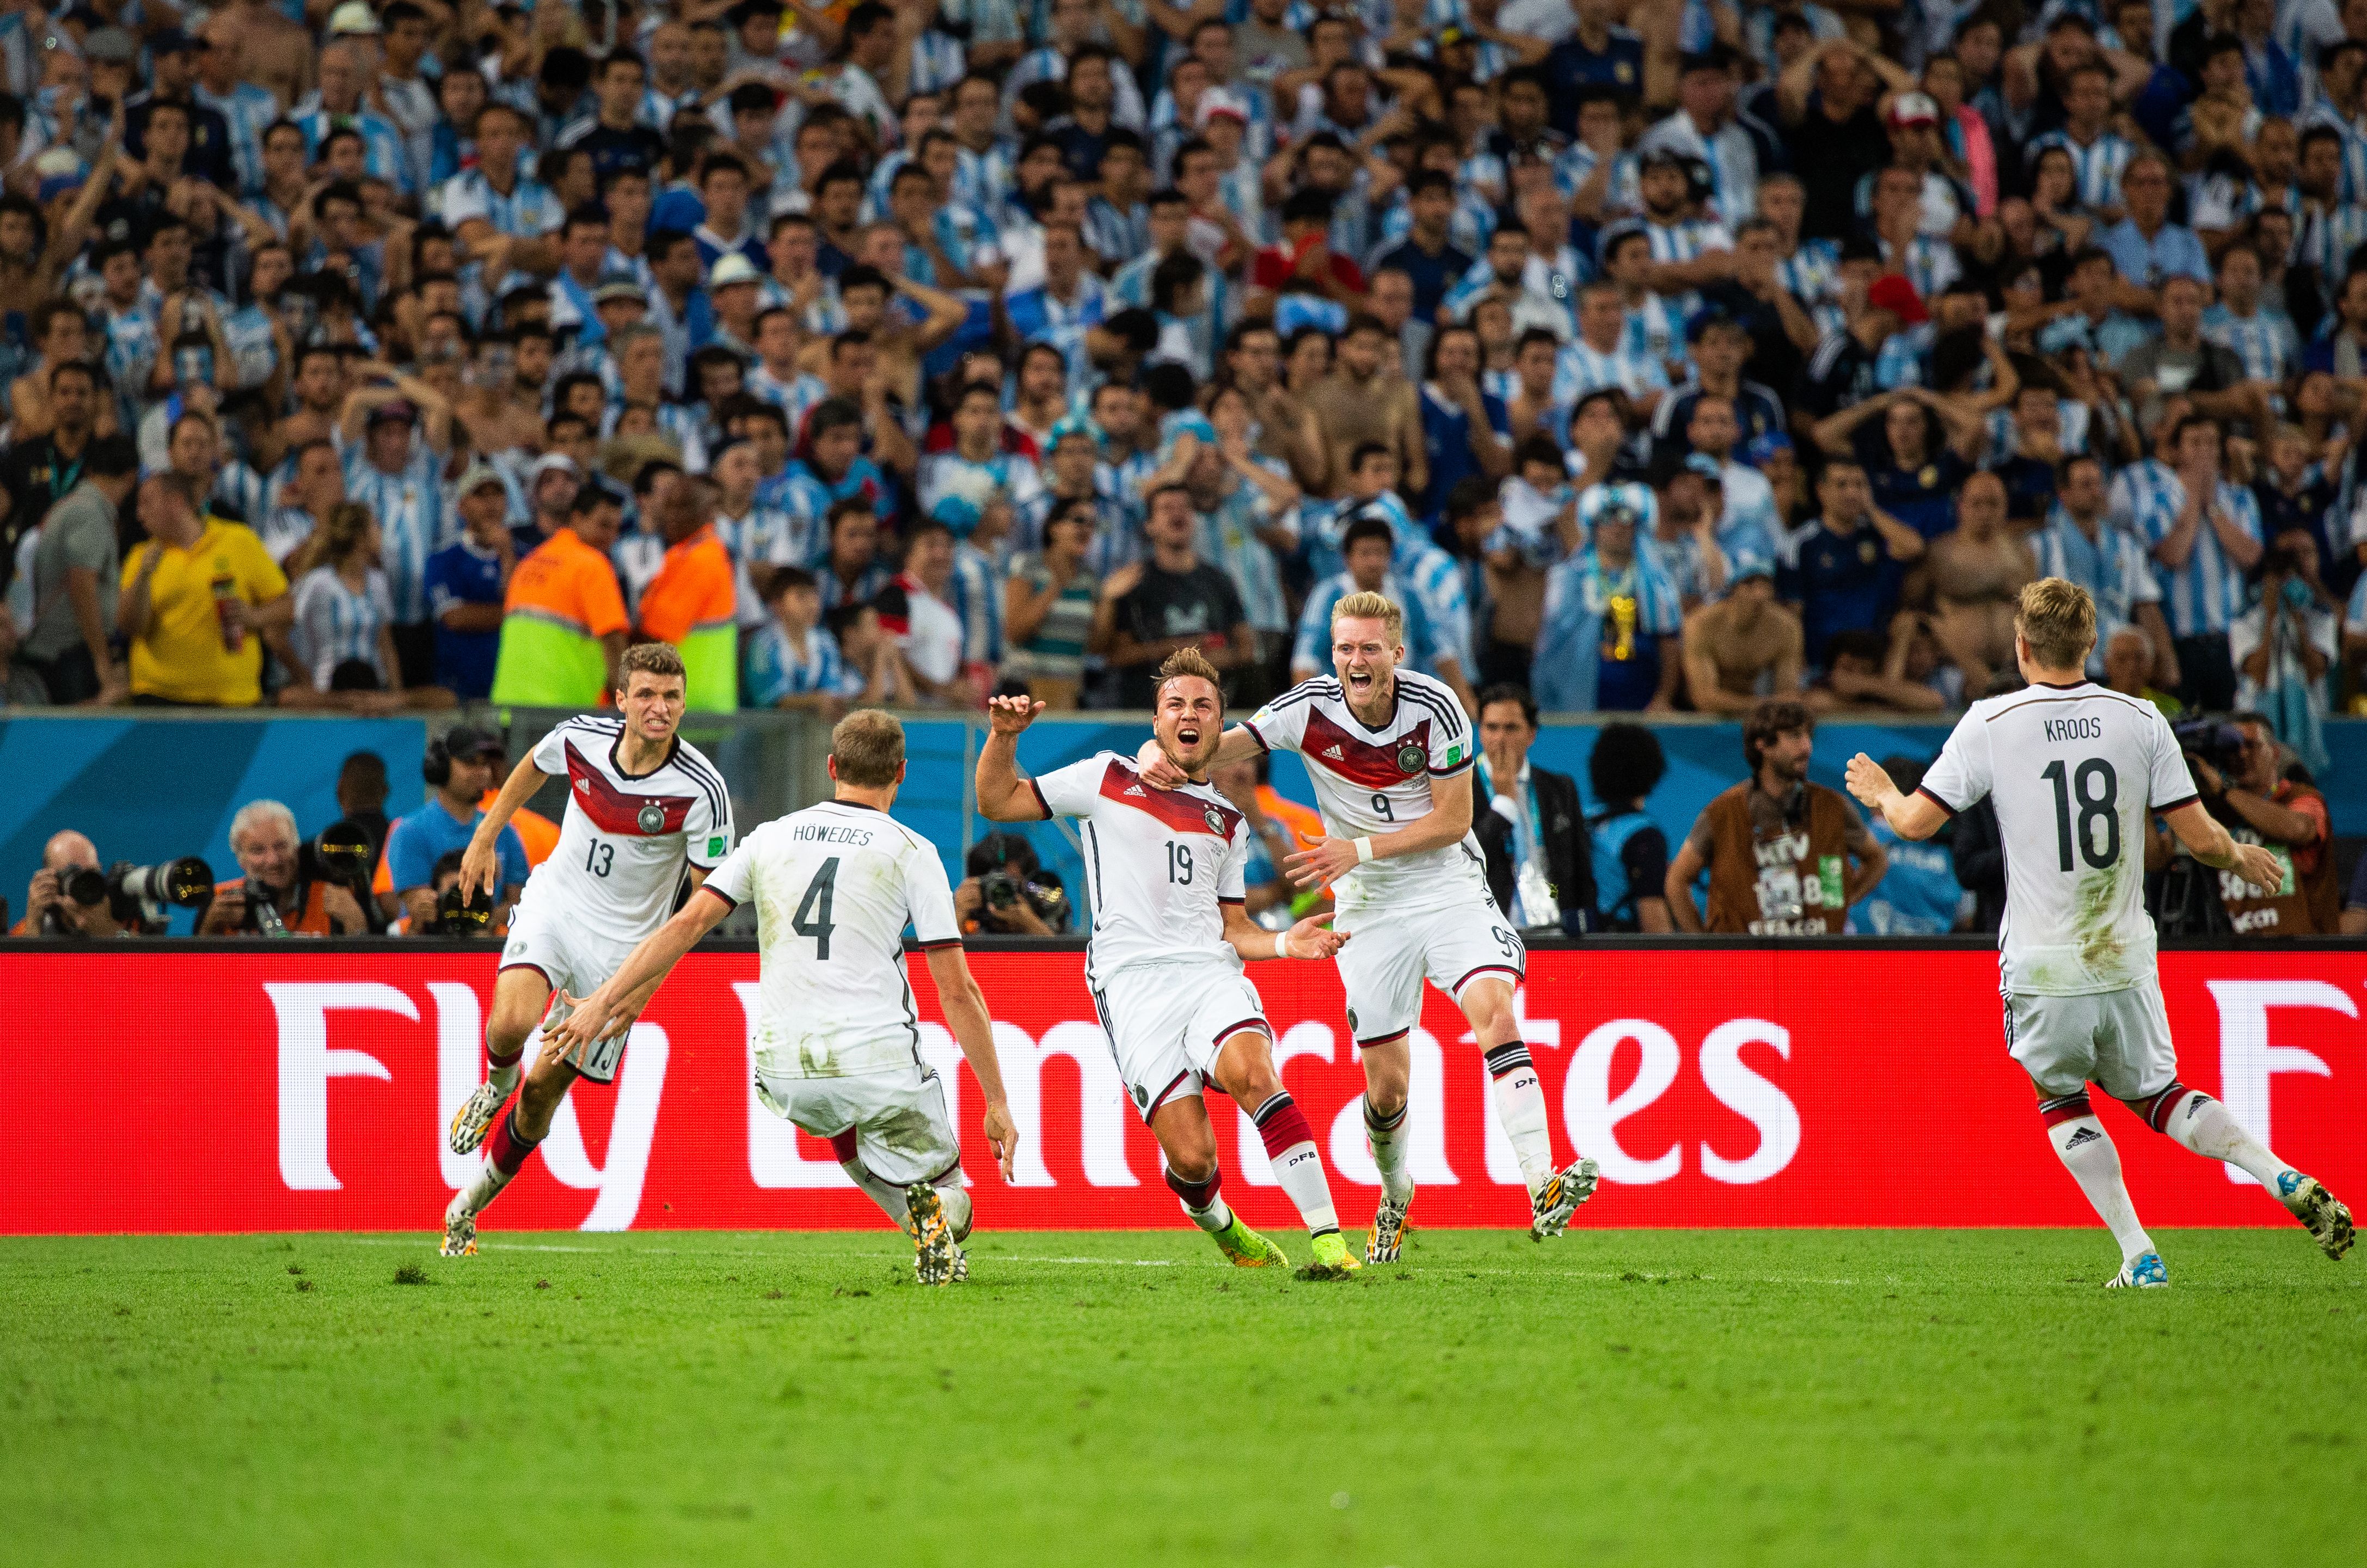 Germany v Argentina in 2014 World Cup